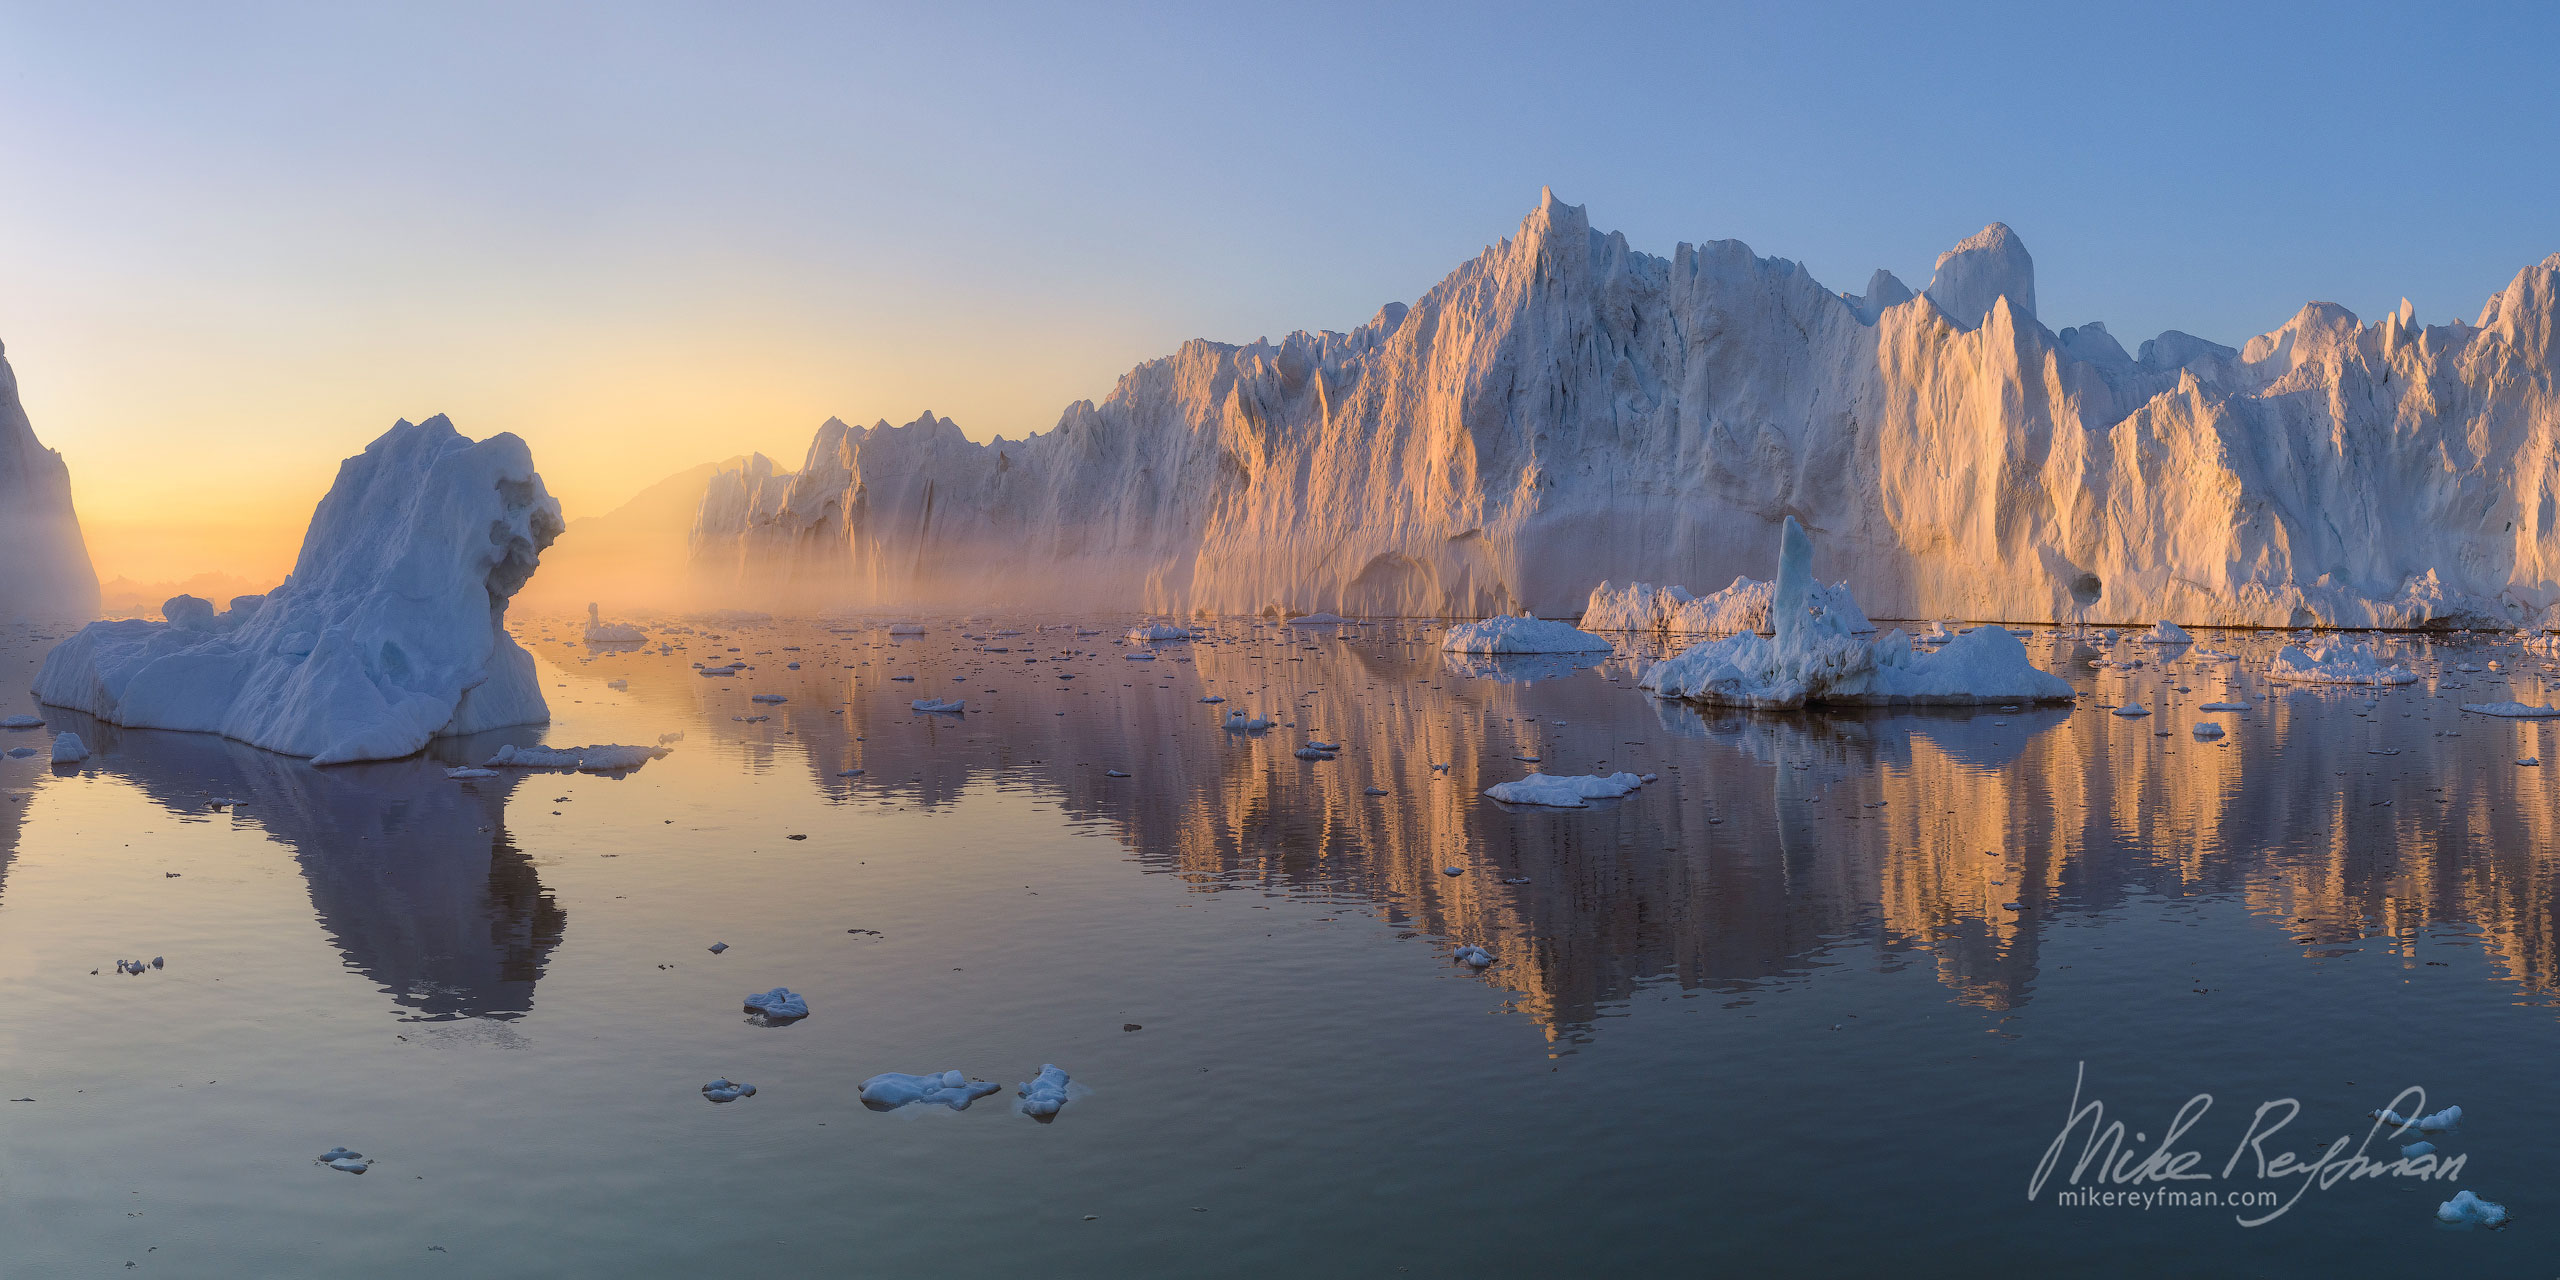 Icebergs in Ilulissat Icefjord. Disco Bay, Greenland. 025-GR-IL_D8B5983-96_Pano-1x2 - Enormous icebergs of Ilulissat Icefjord and Disco Bay. Western Greenland. - Mike Reyfman Photography